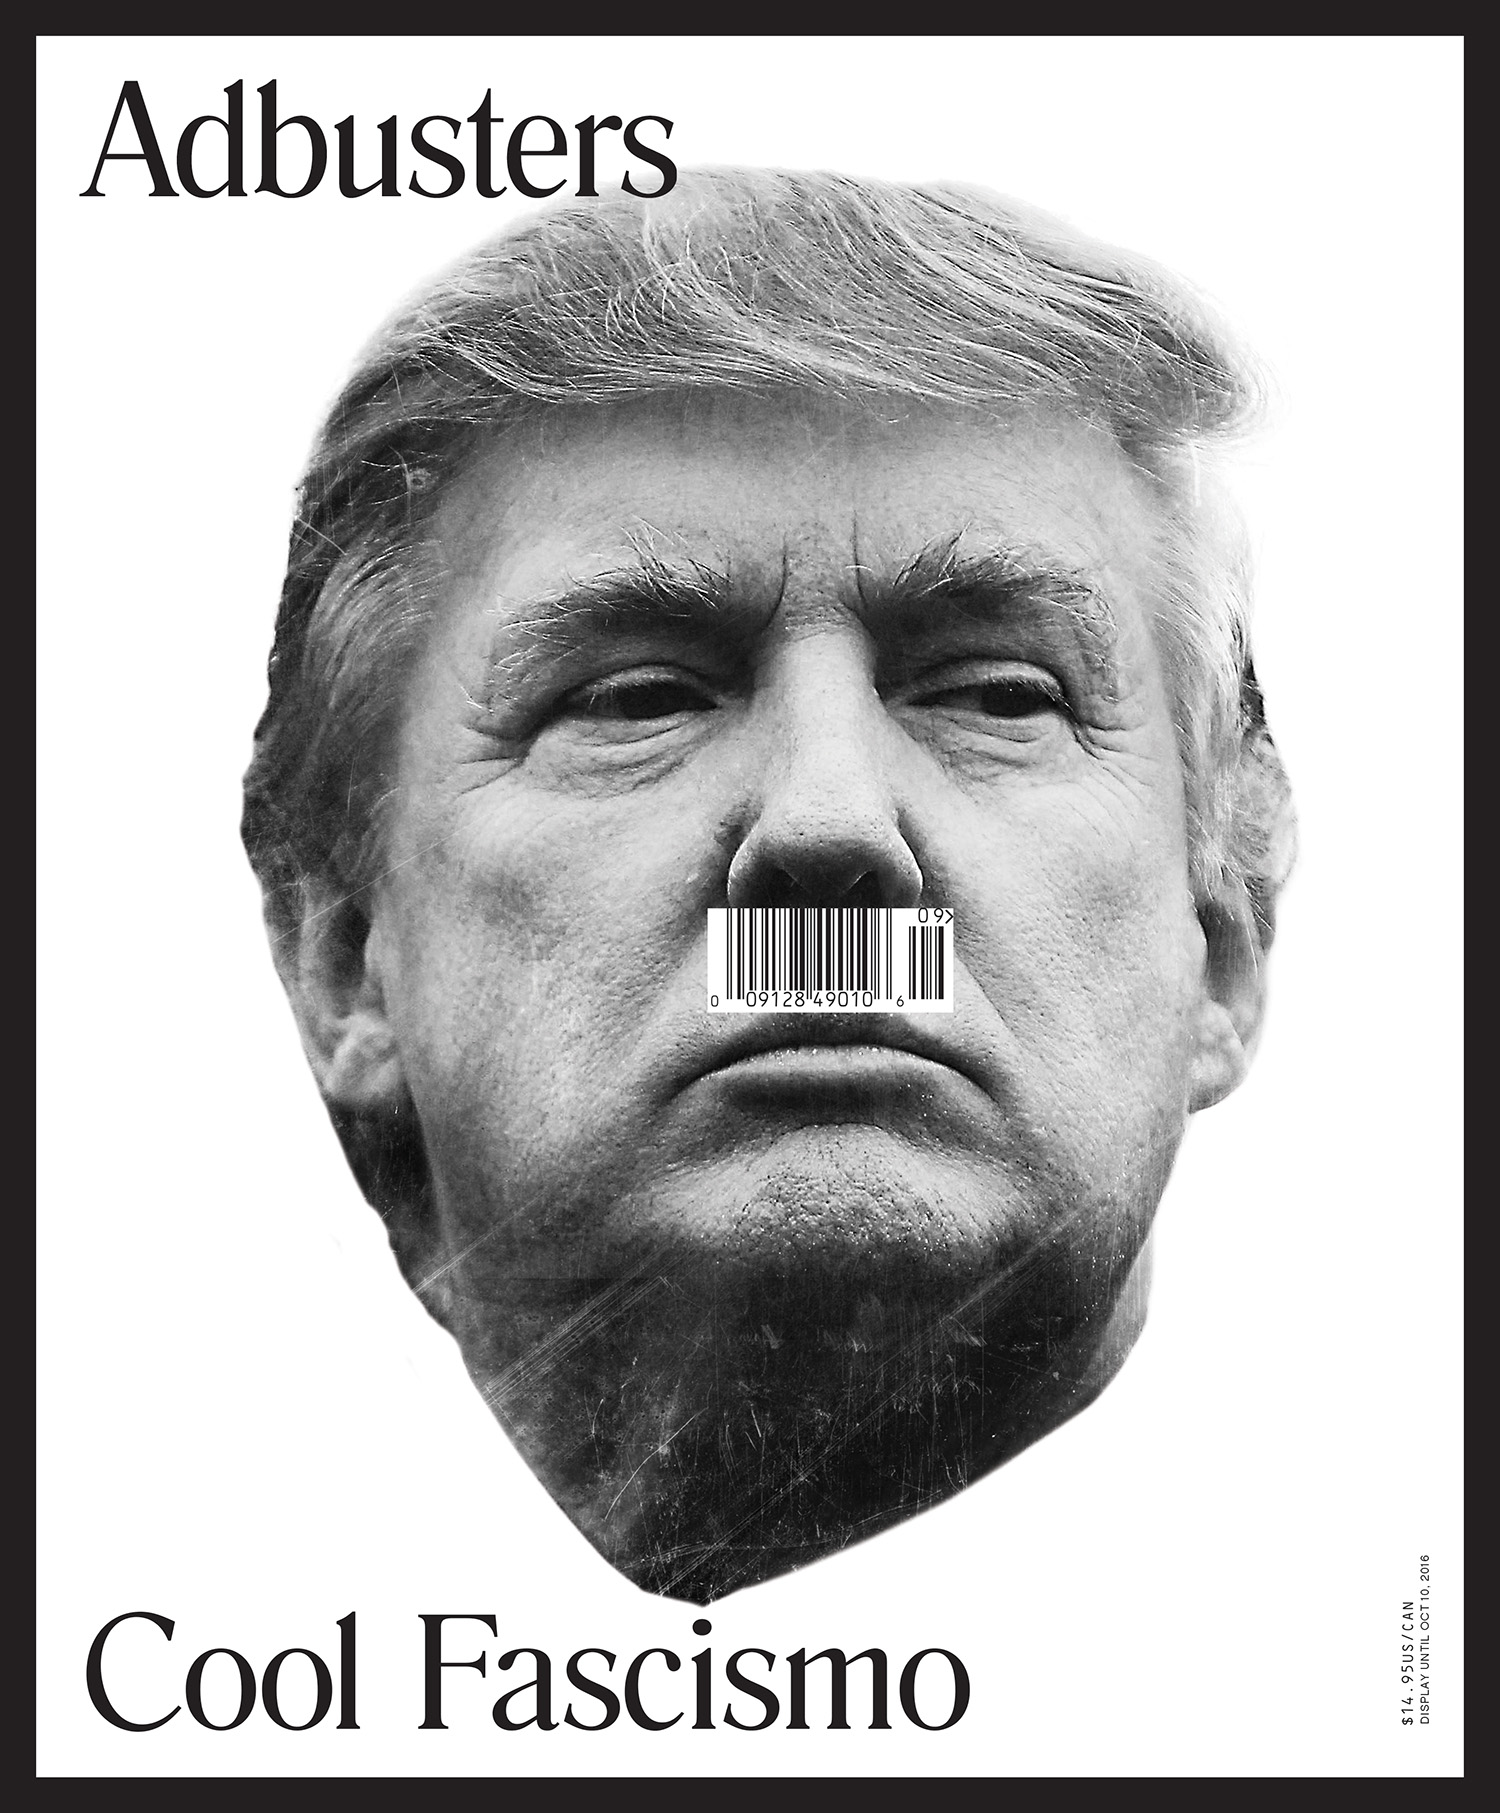 Adbusters cover by Syd Danger